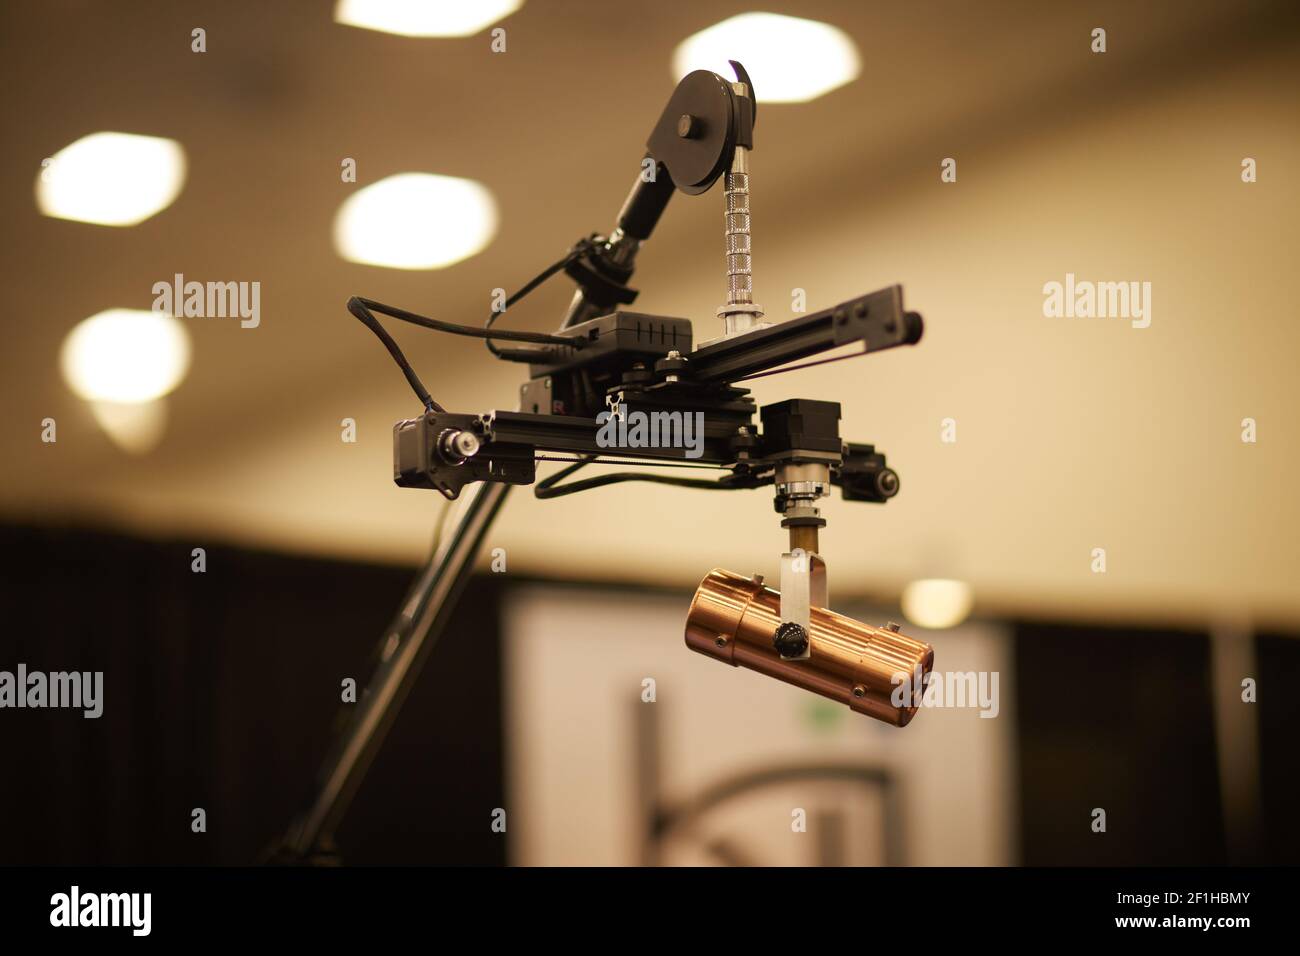 Copper microphone on remote positioning device overhead orchestral stand Musical Instrument Convention Stock Photo